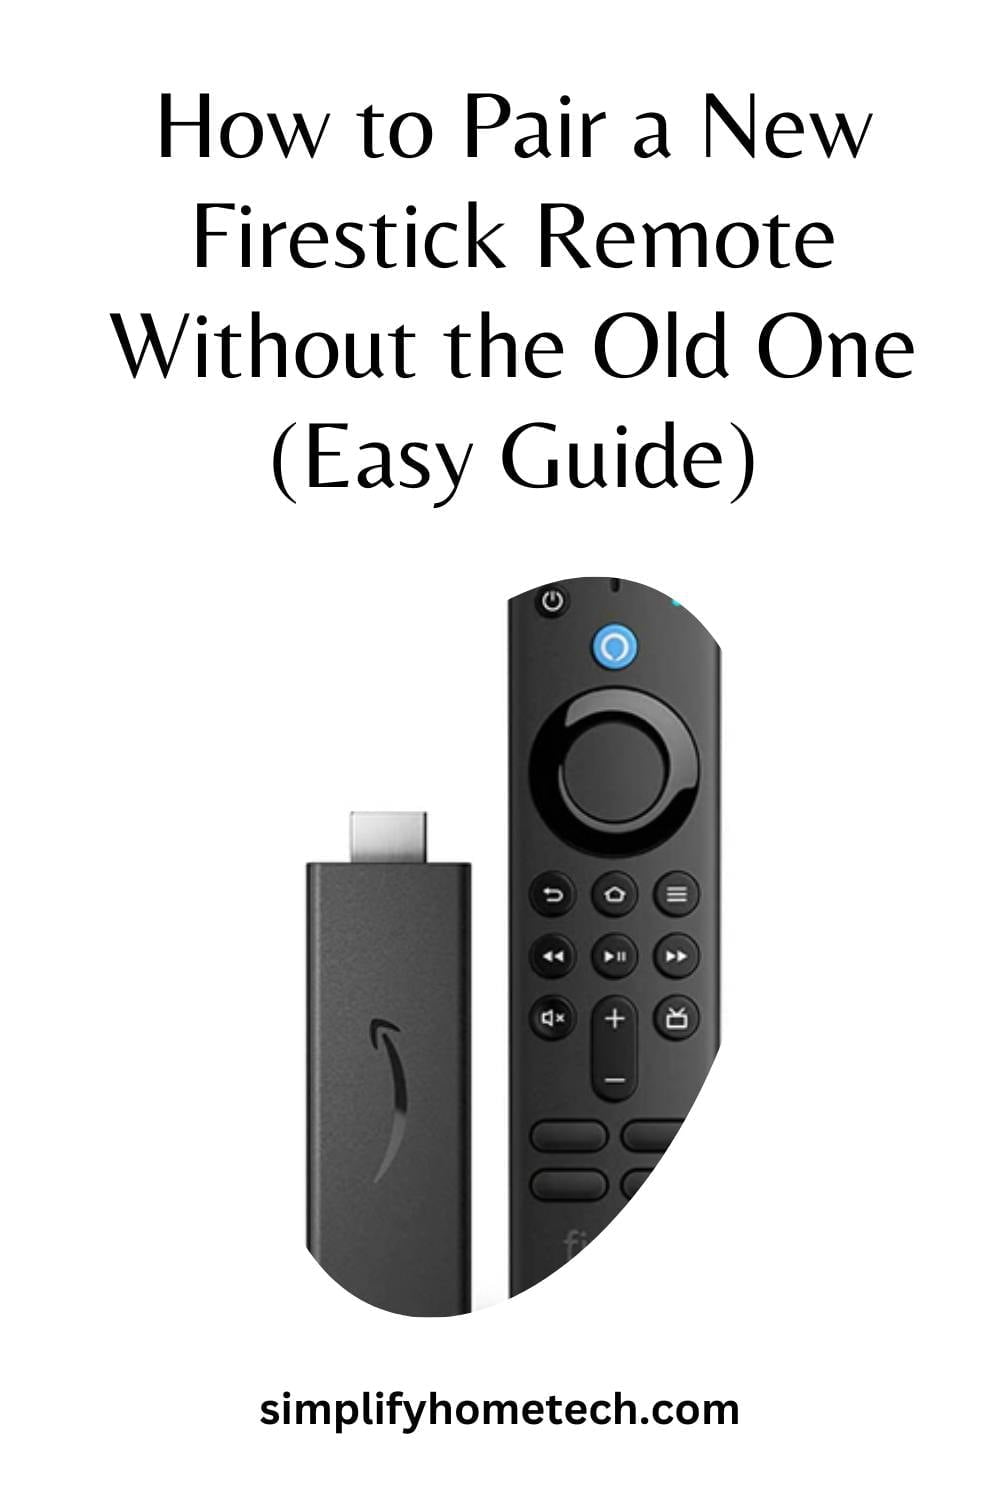 How to Pair a New Firestick Remote Without the Old One